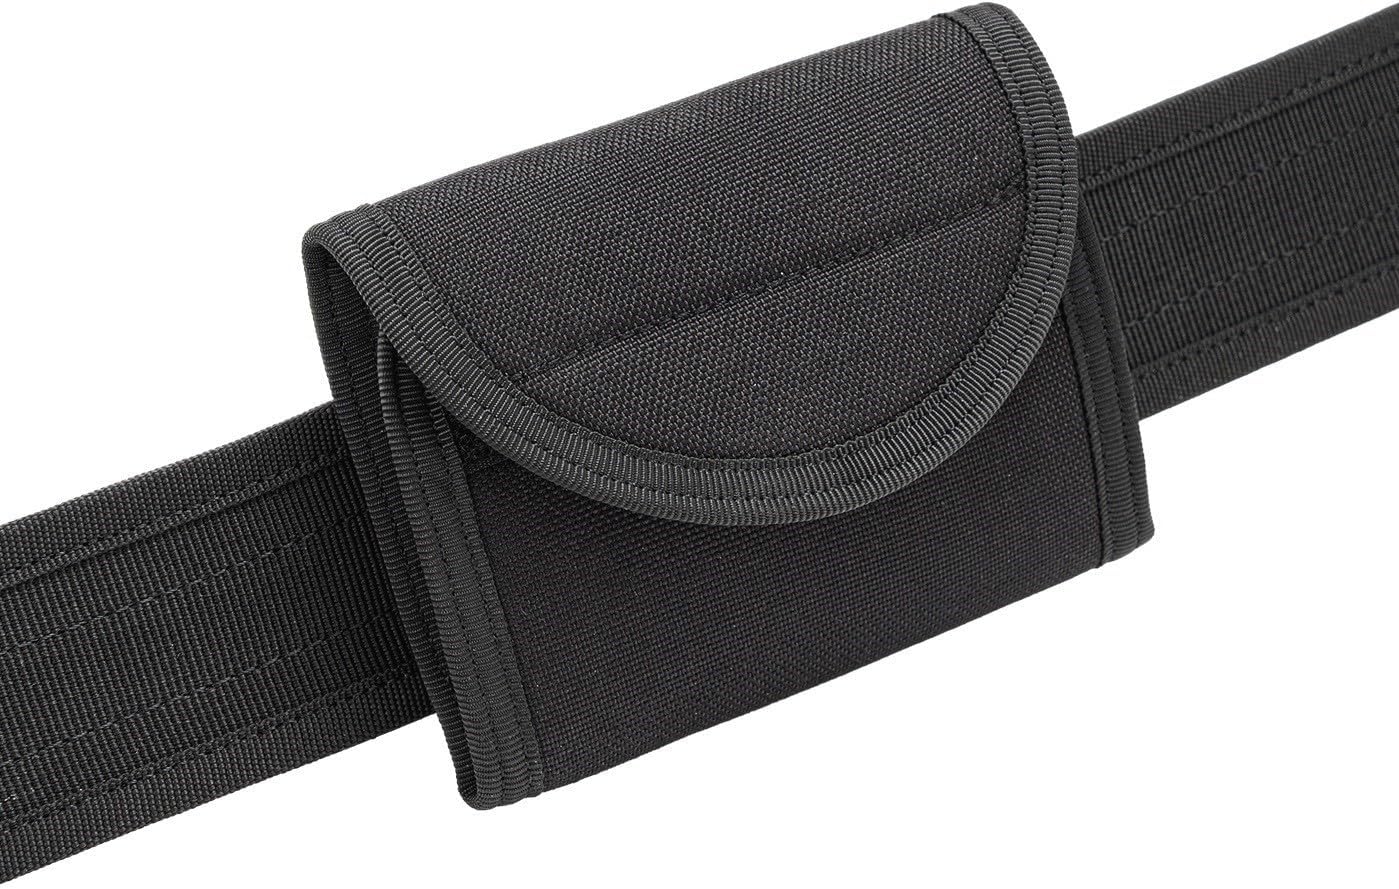 Duty Belt Glove Pouch Latex Disposable Glove Holder Keeper for Police Firefighter EMS EMT Paramedic First Responders